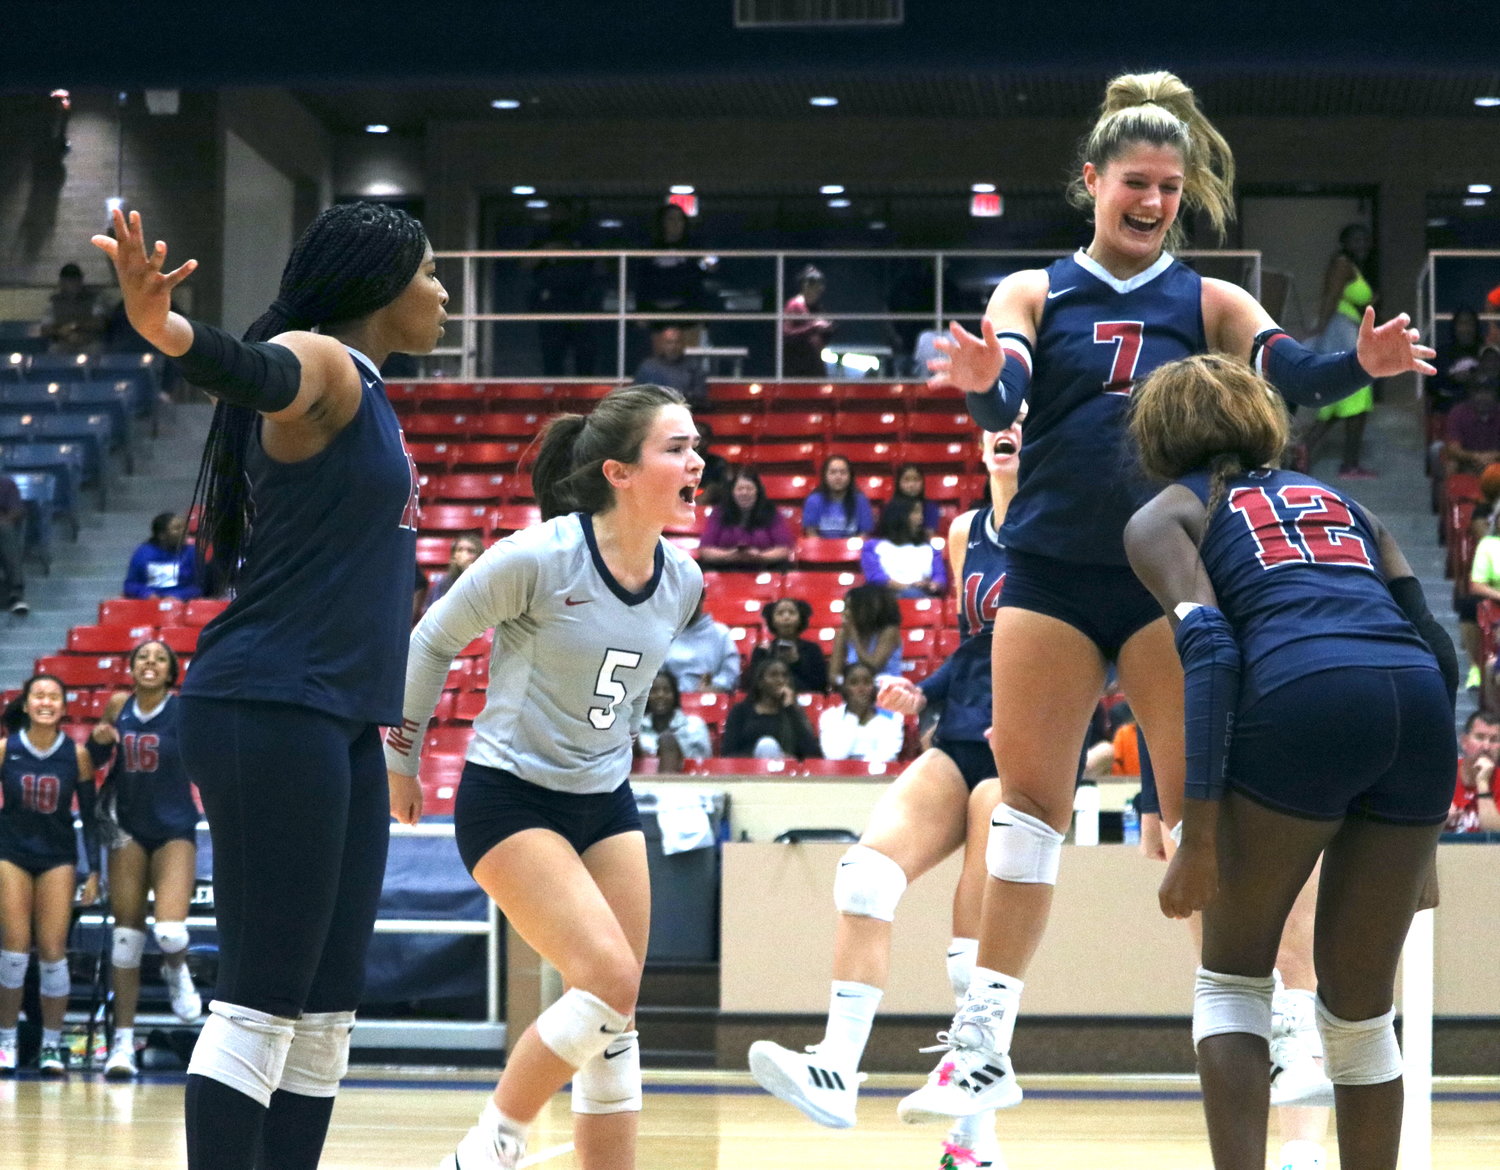 Tompkins players celebrate after a point in the first set during Tuesday's match between Tompkins and Ridge Point at Wheeler Field House.